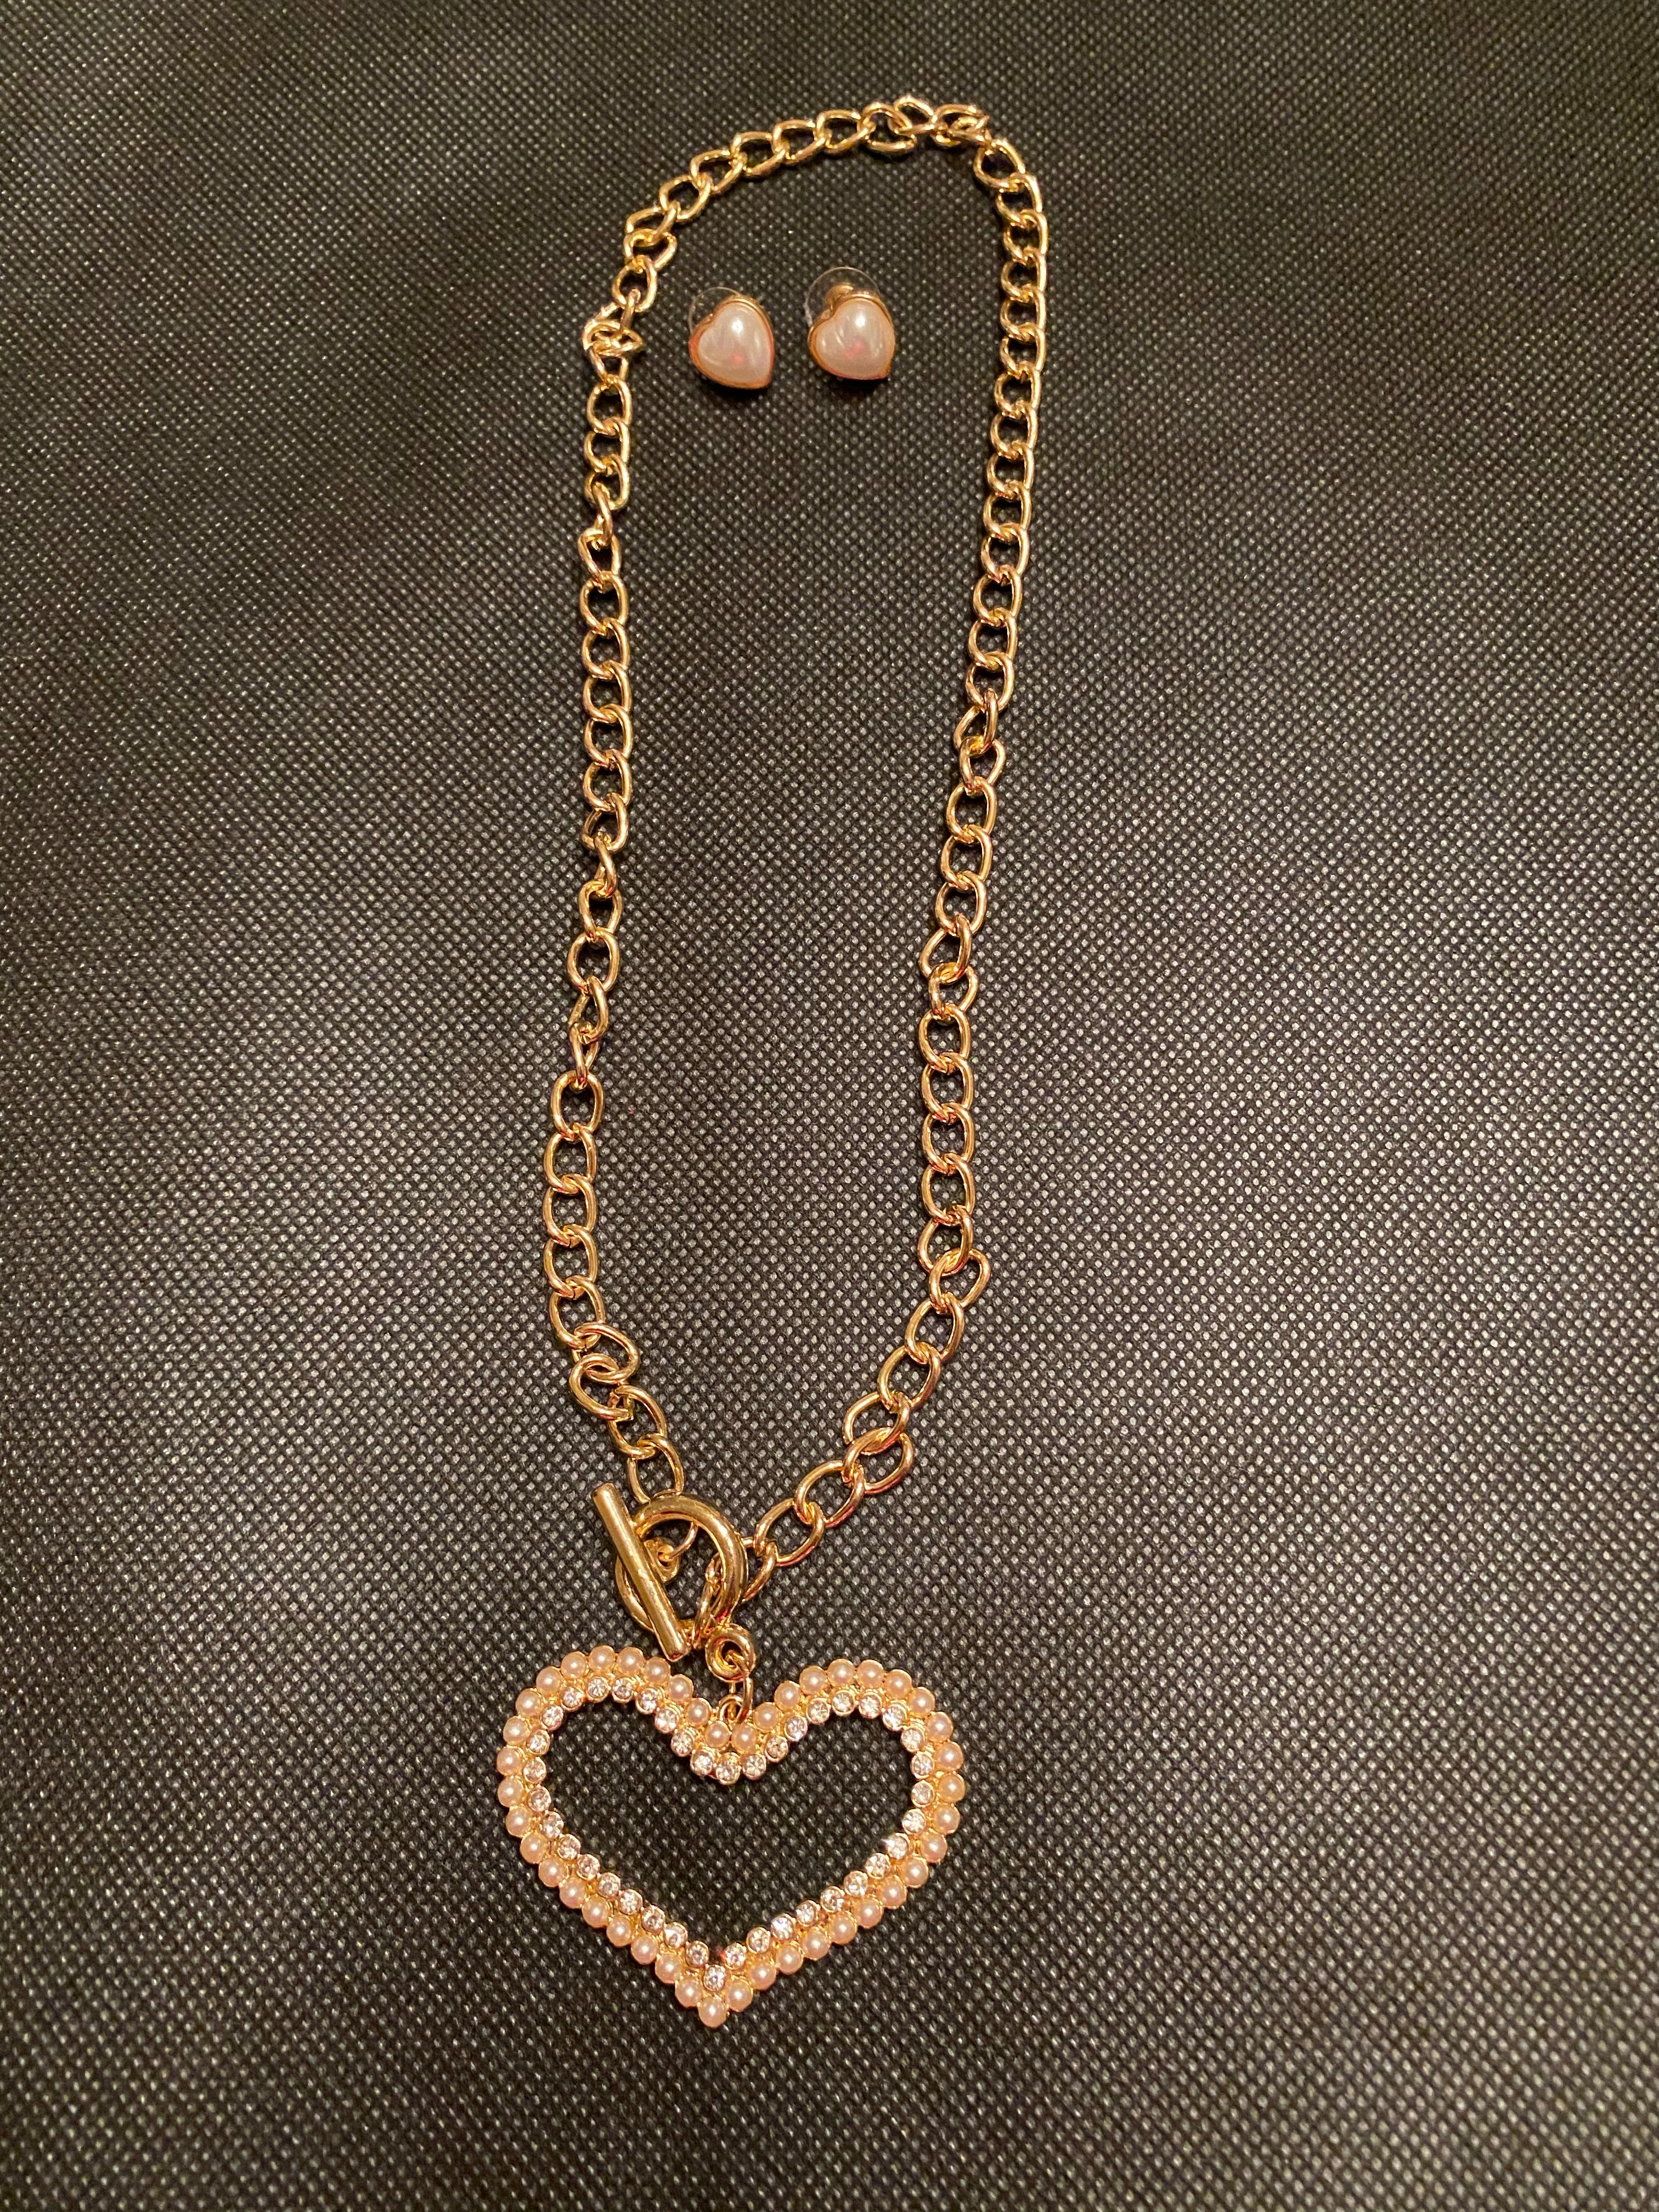 THE SOPHISTICATED DIVA PEARL HEART NECKLACE SET